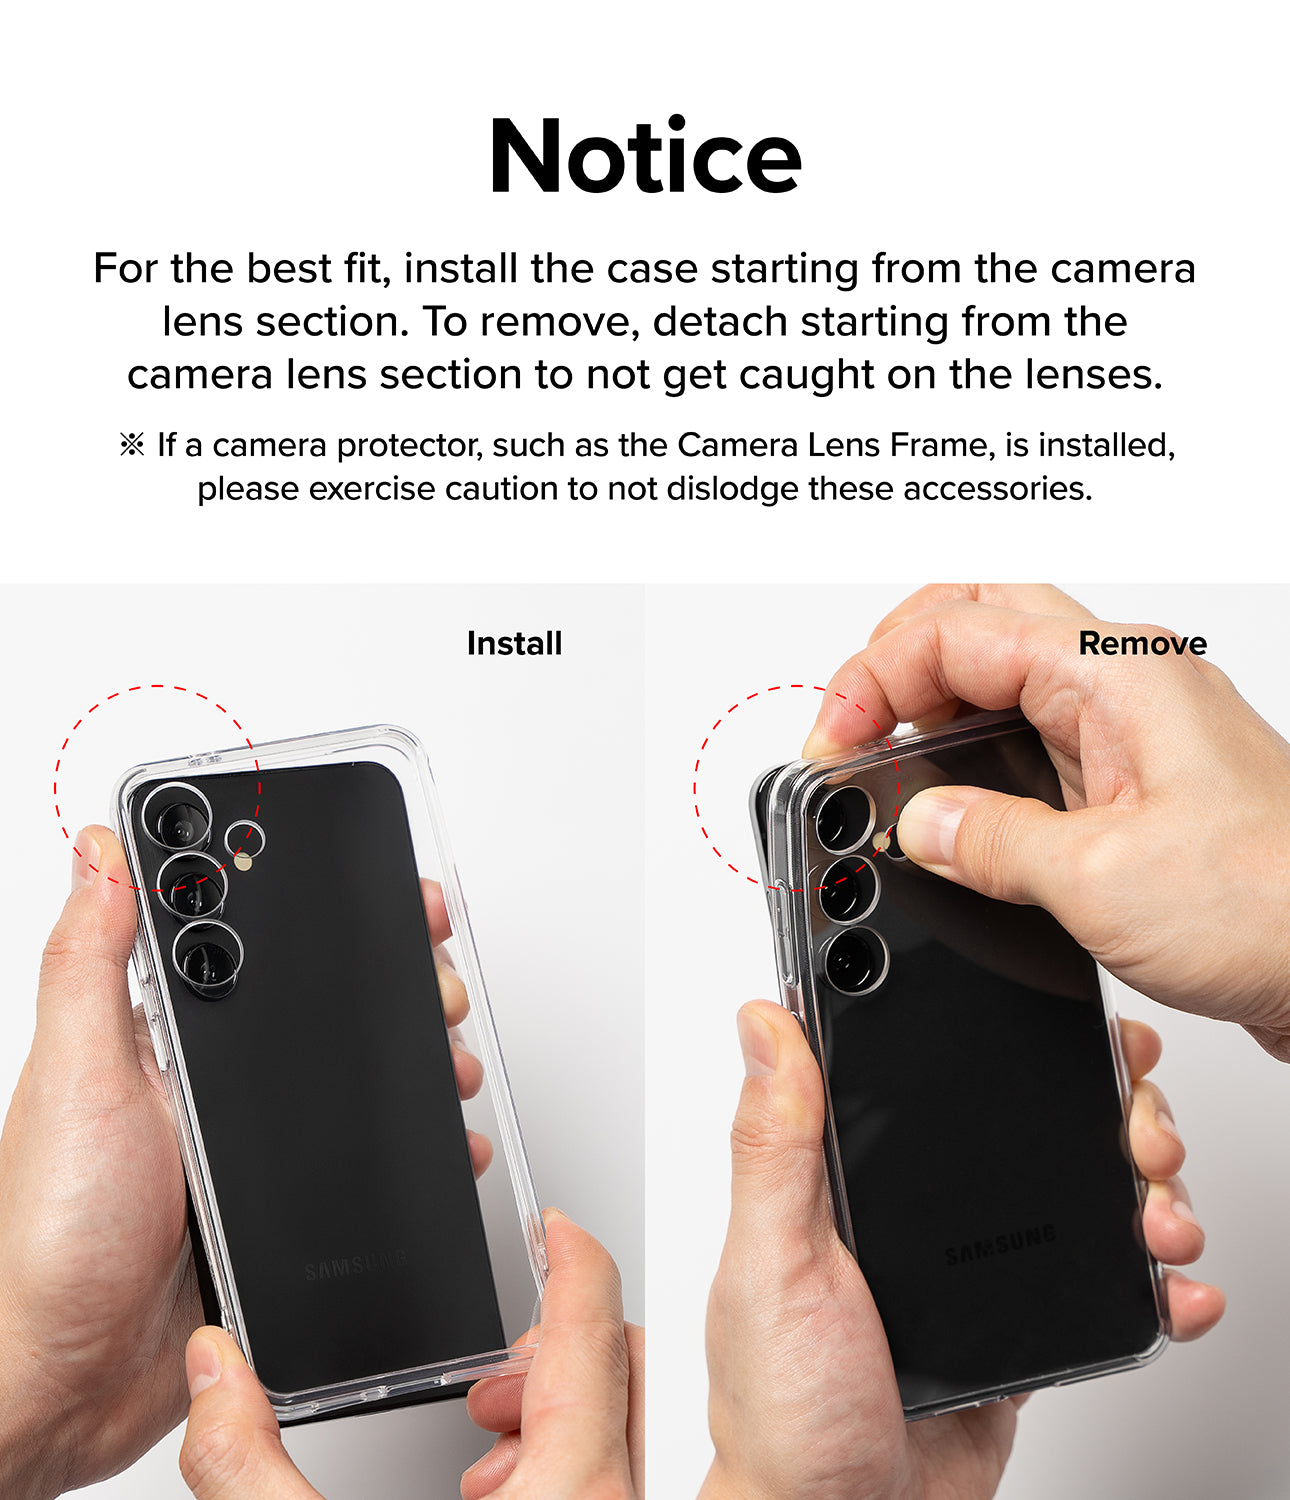 Galaxy S24 Ultra Case | Fusion Card - Notice. For the best fit, install the case starting from the camera lens section. To remove, detach starting from the camera lens section to not get caught on the lenses.